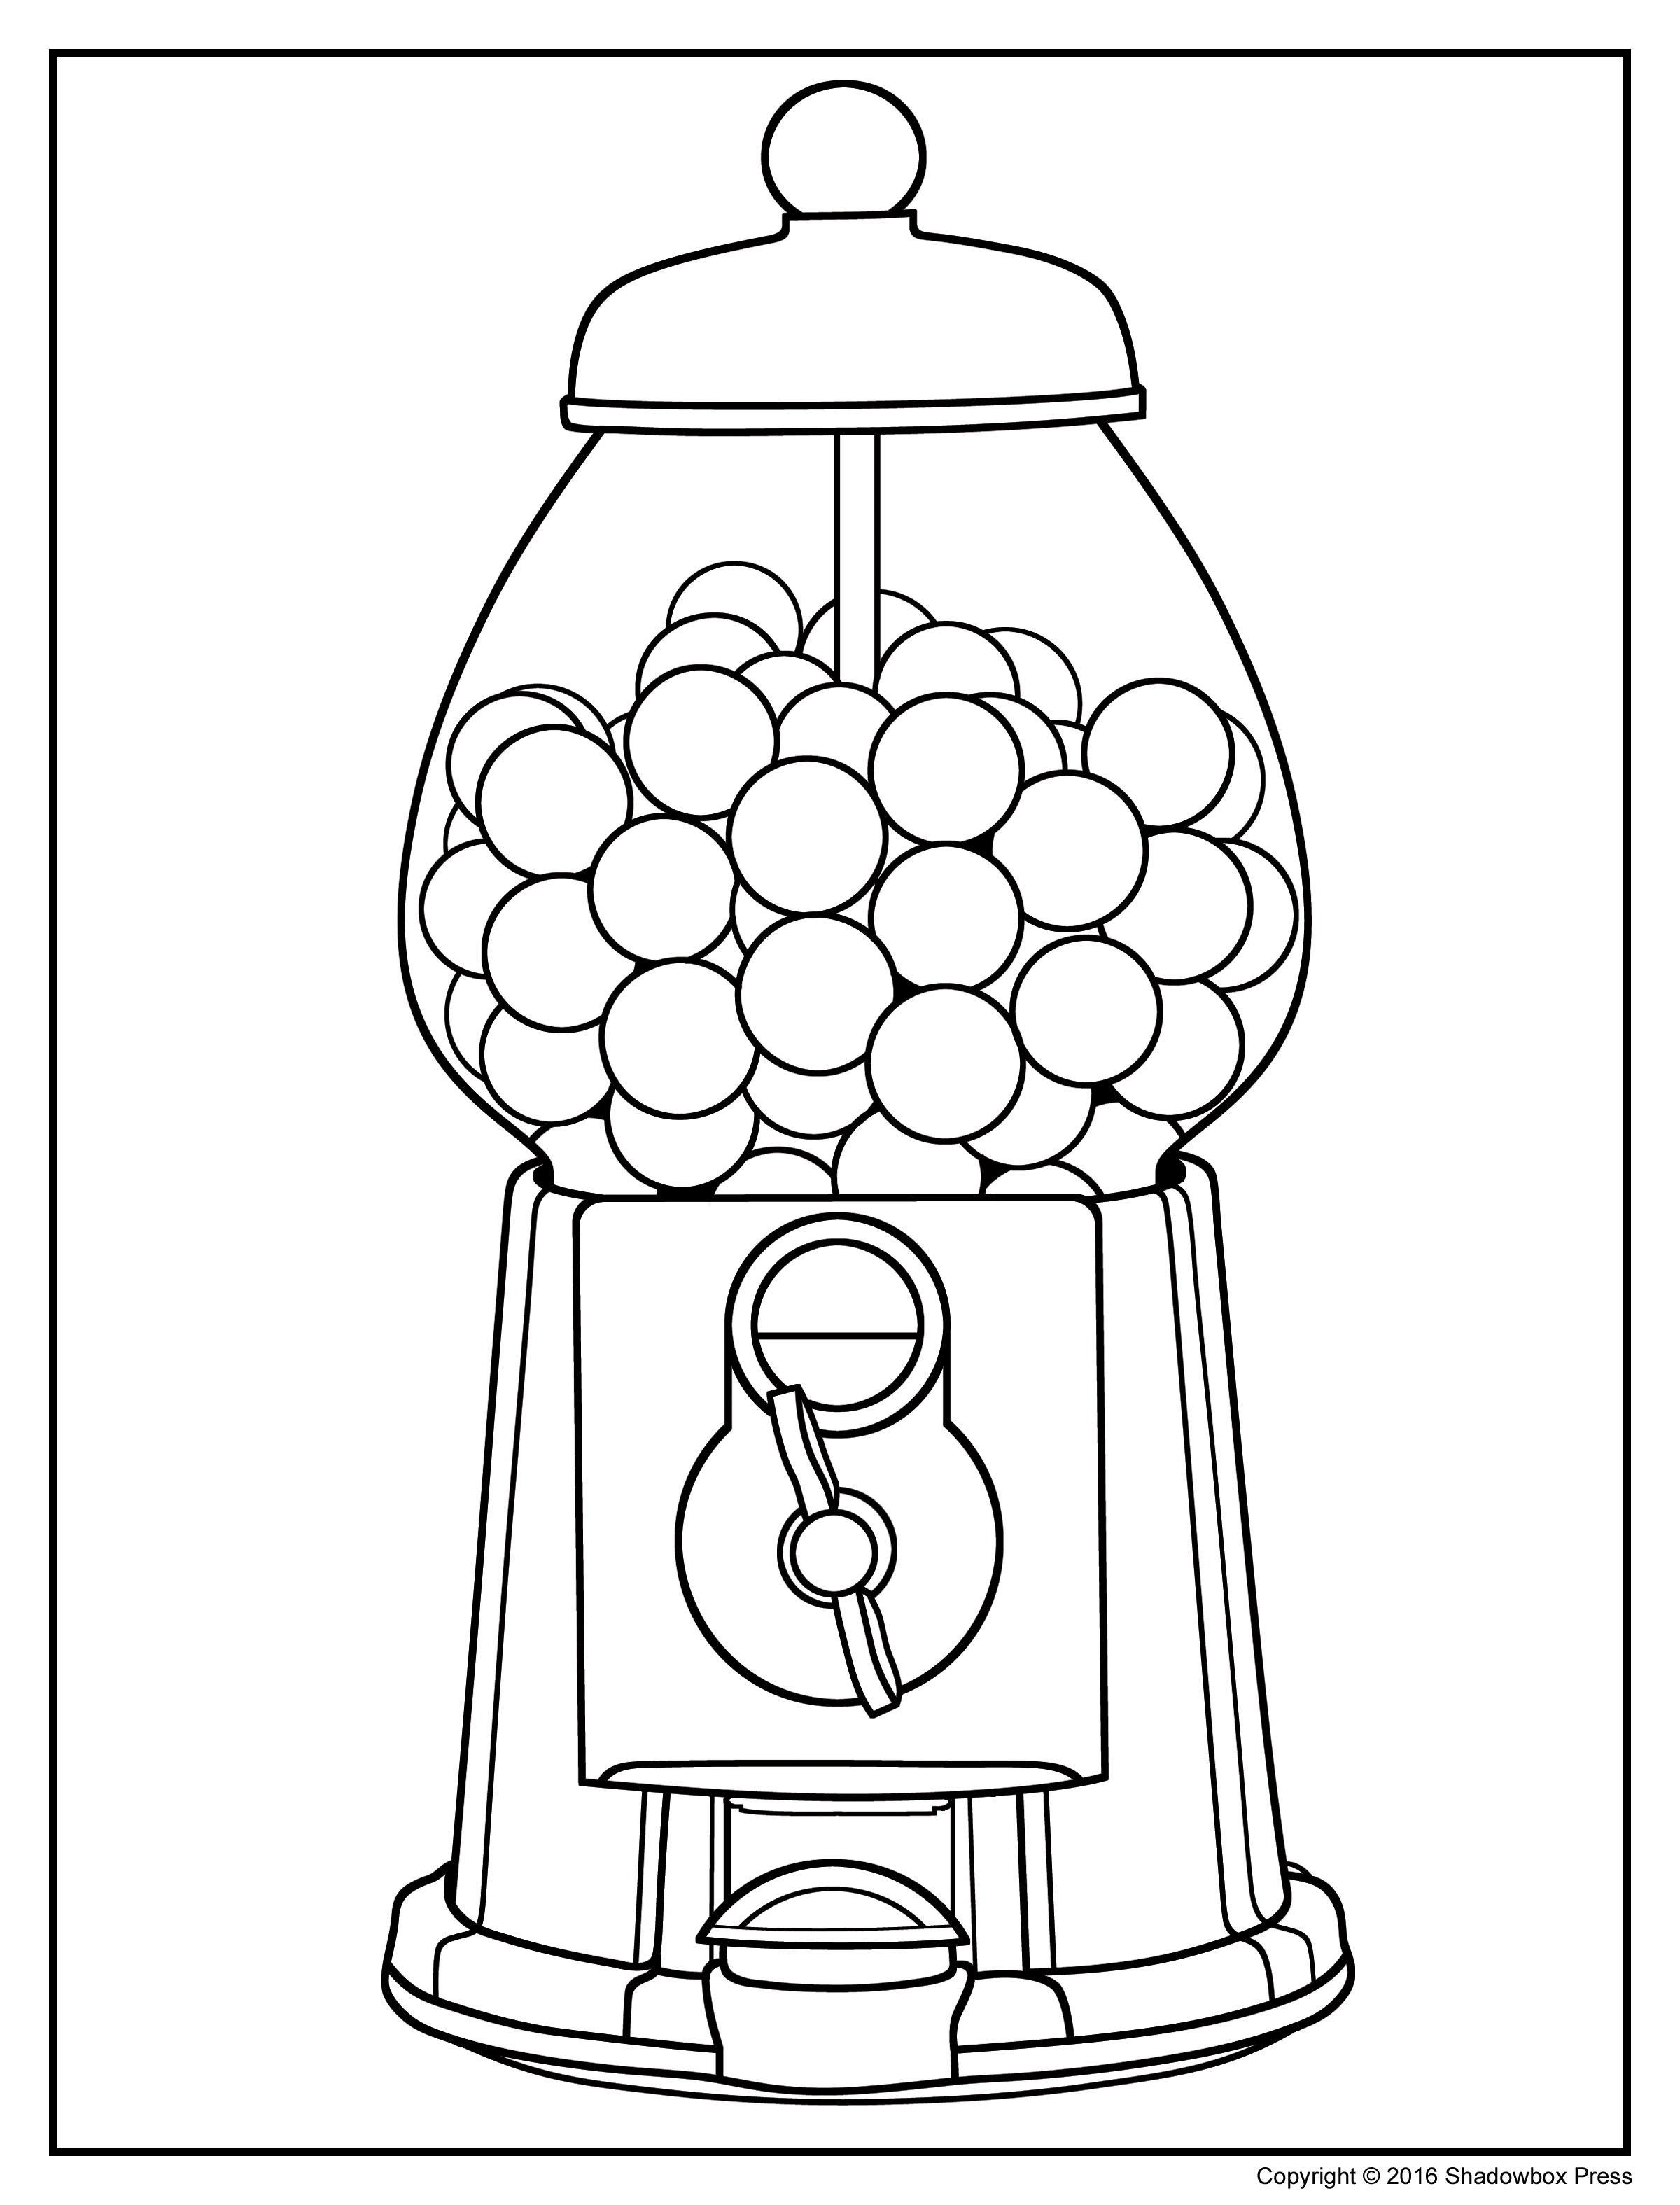 bubble-gum-coloring-page-at-getcolorings-free-printable-colorings